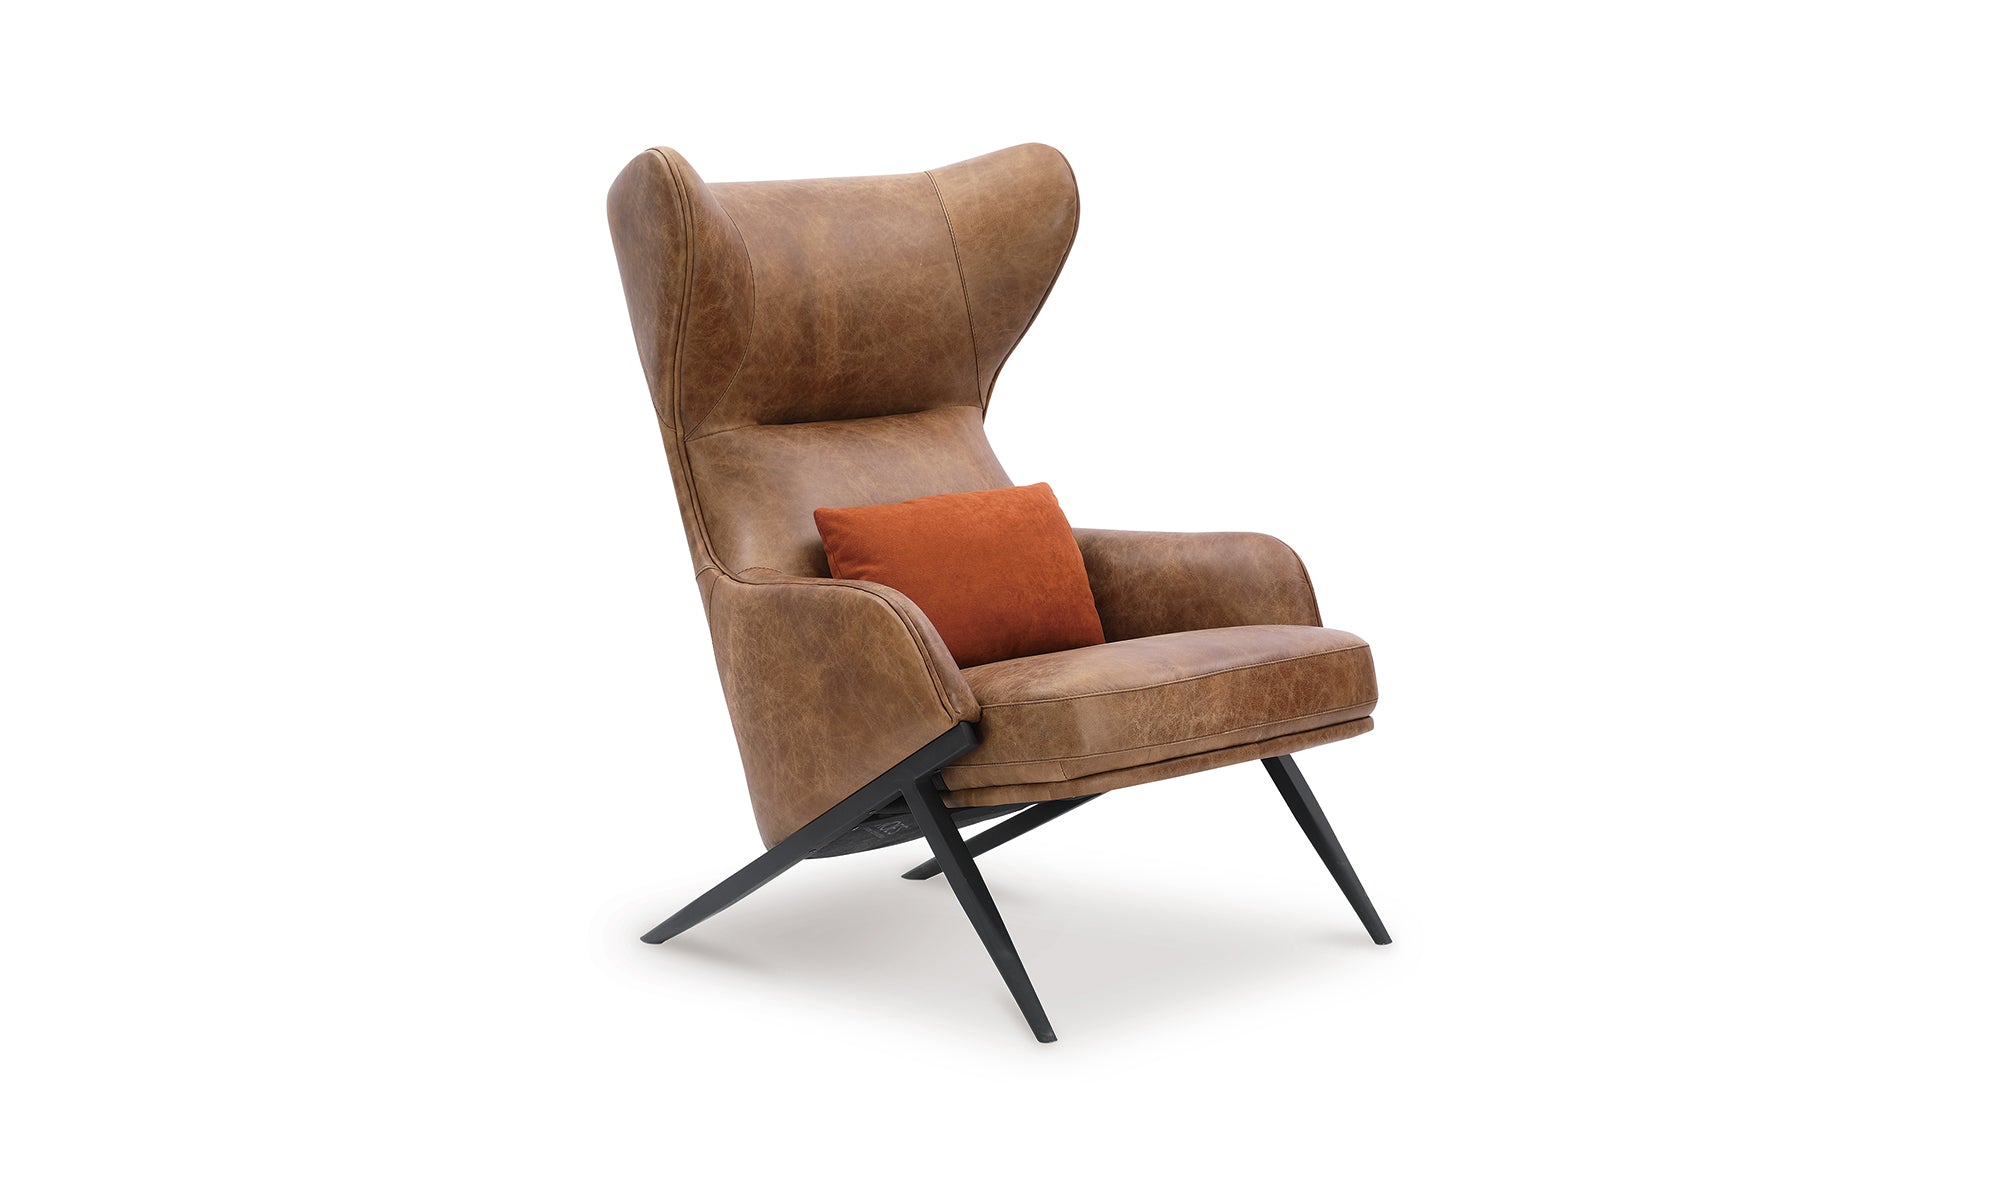 Amos Leather Accent Chair - Cappuccino